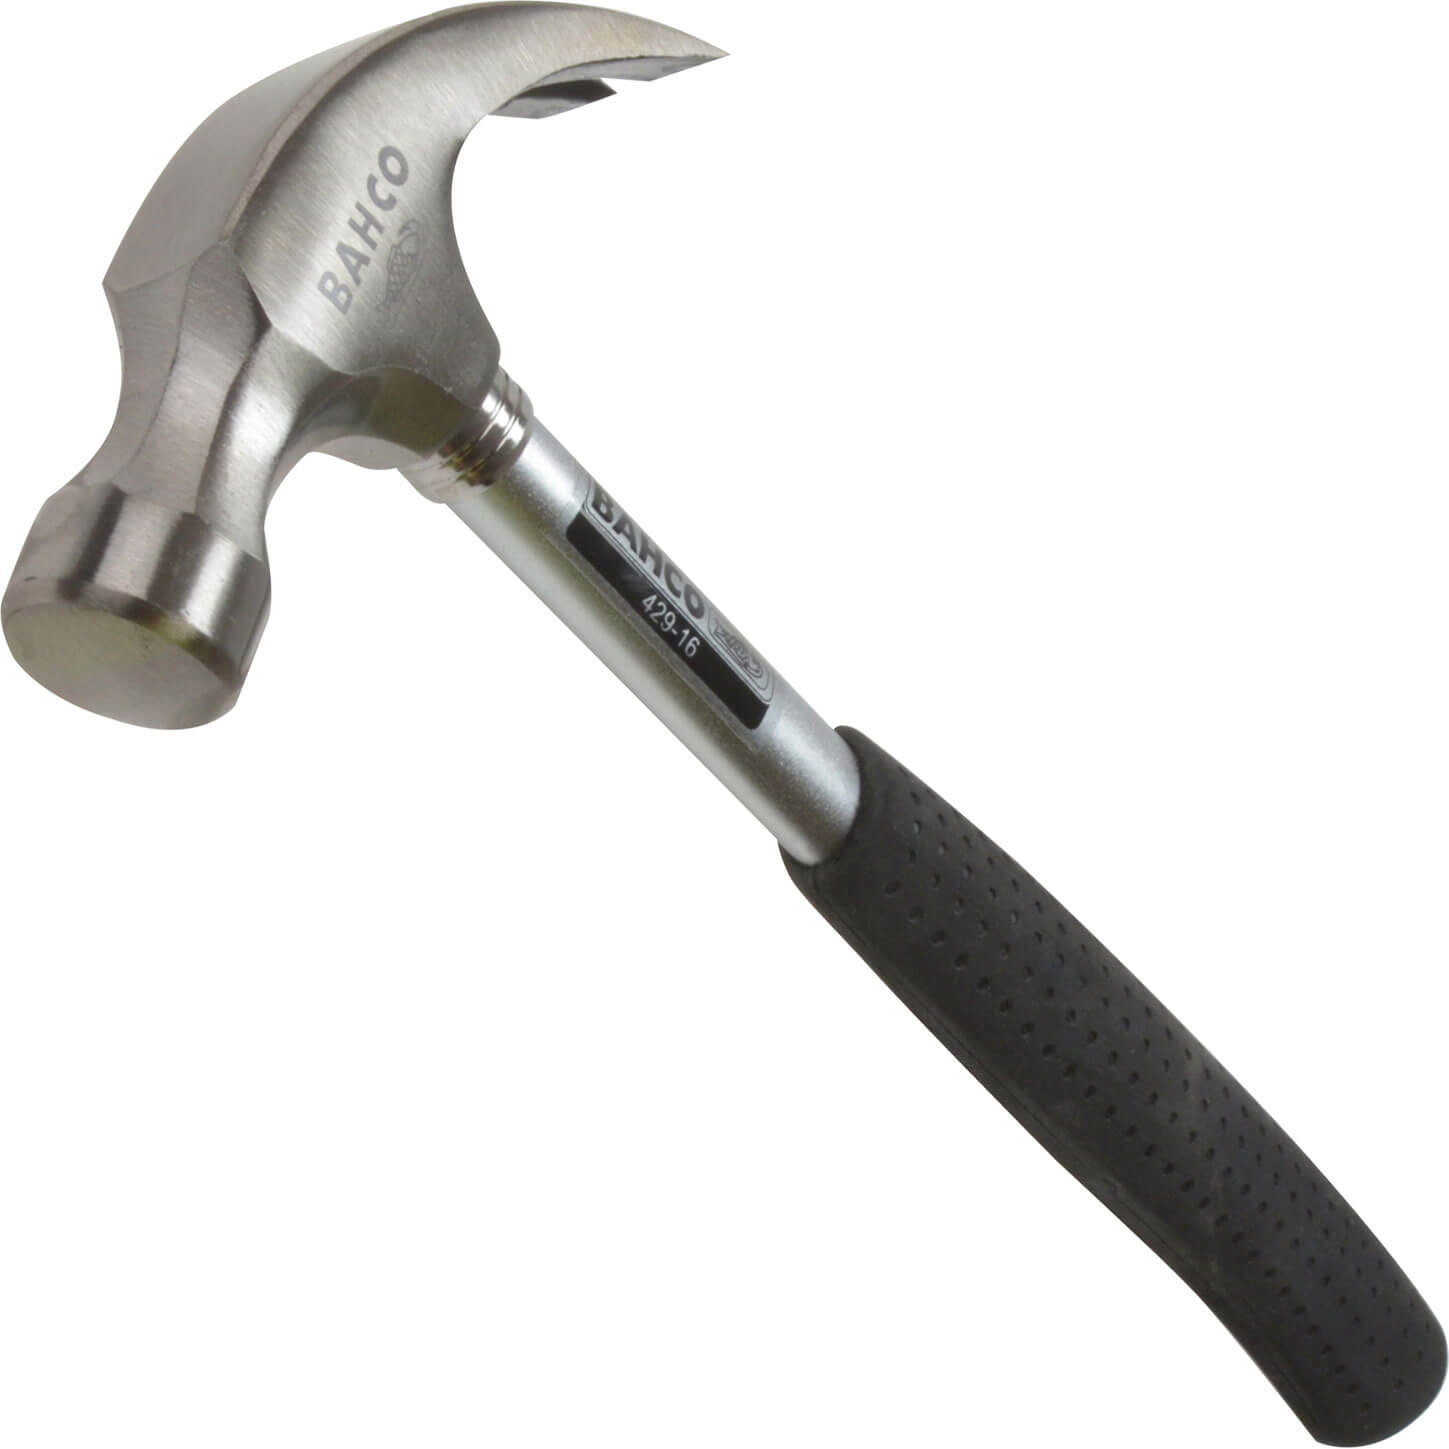 Image of Bahco Claw Hammer with Steel Handle 16oz